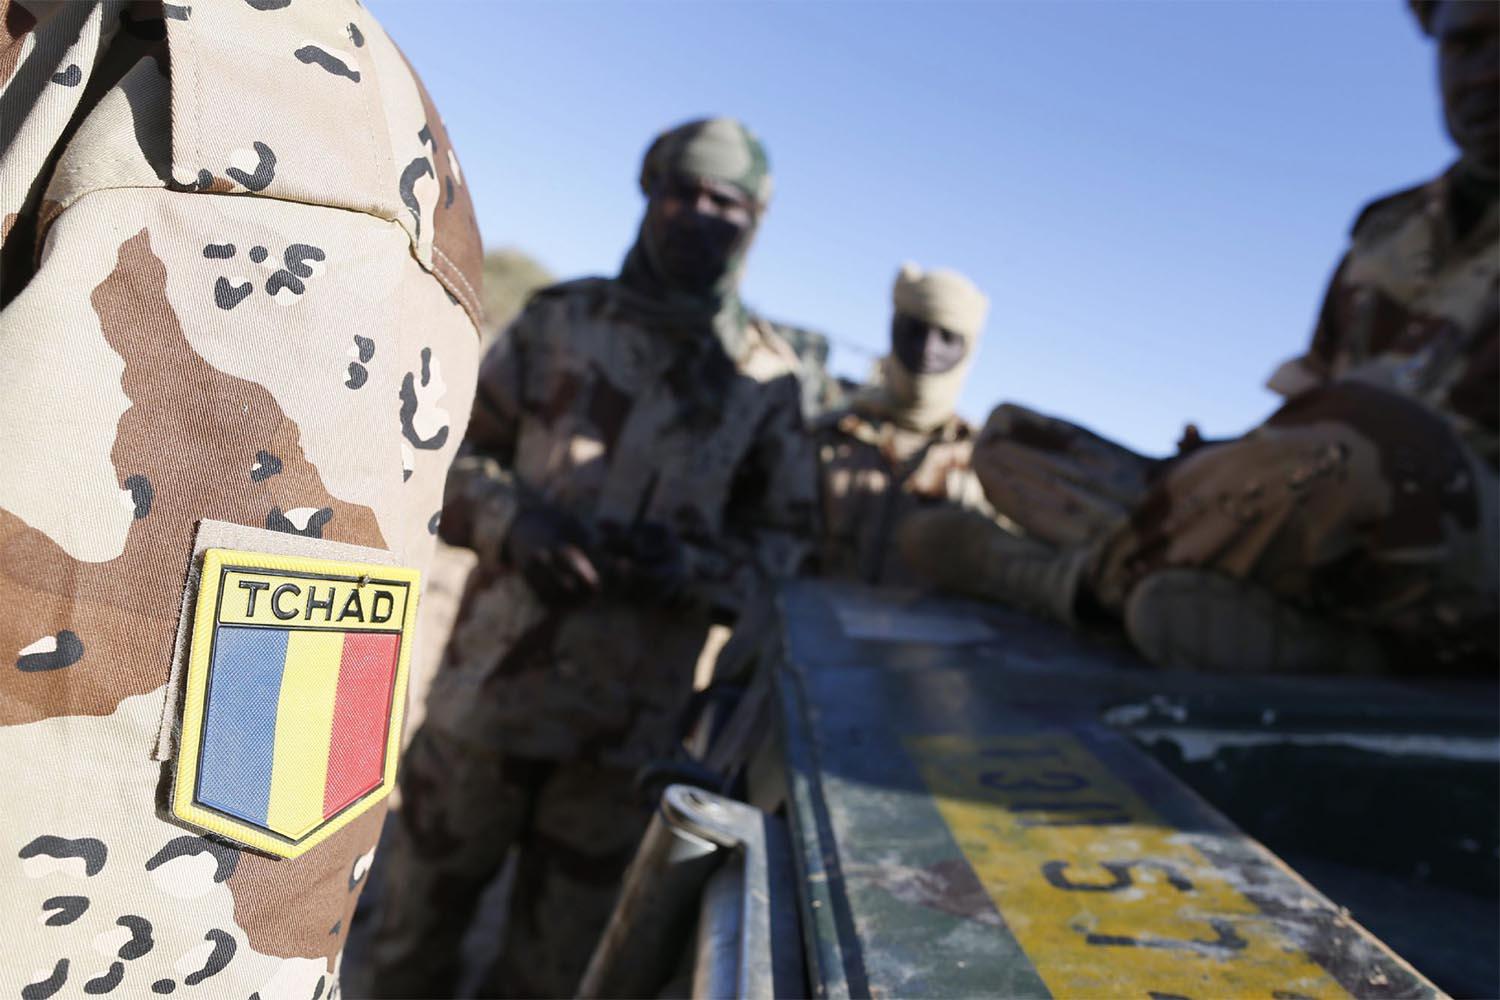 Chadian soldiers make up nearly 1,400 of the United Nations' 13,000-troop peacekeeping force in north and central Mali